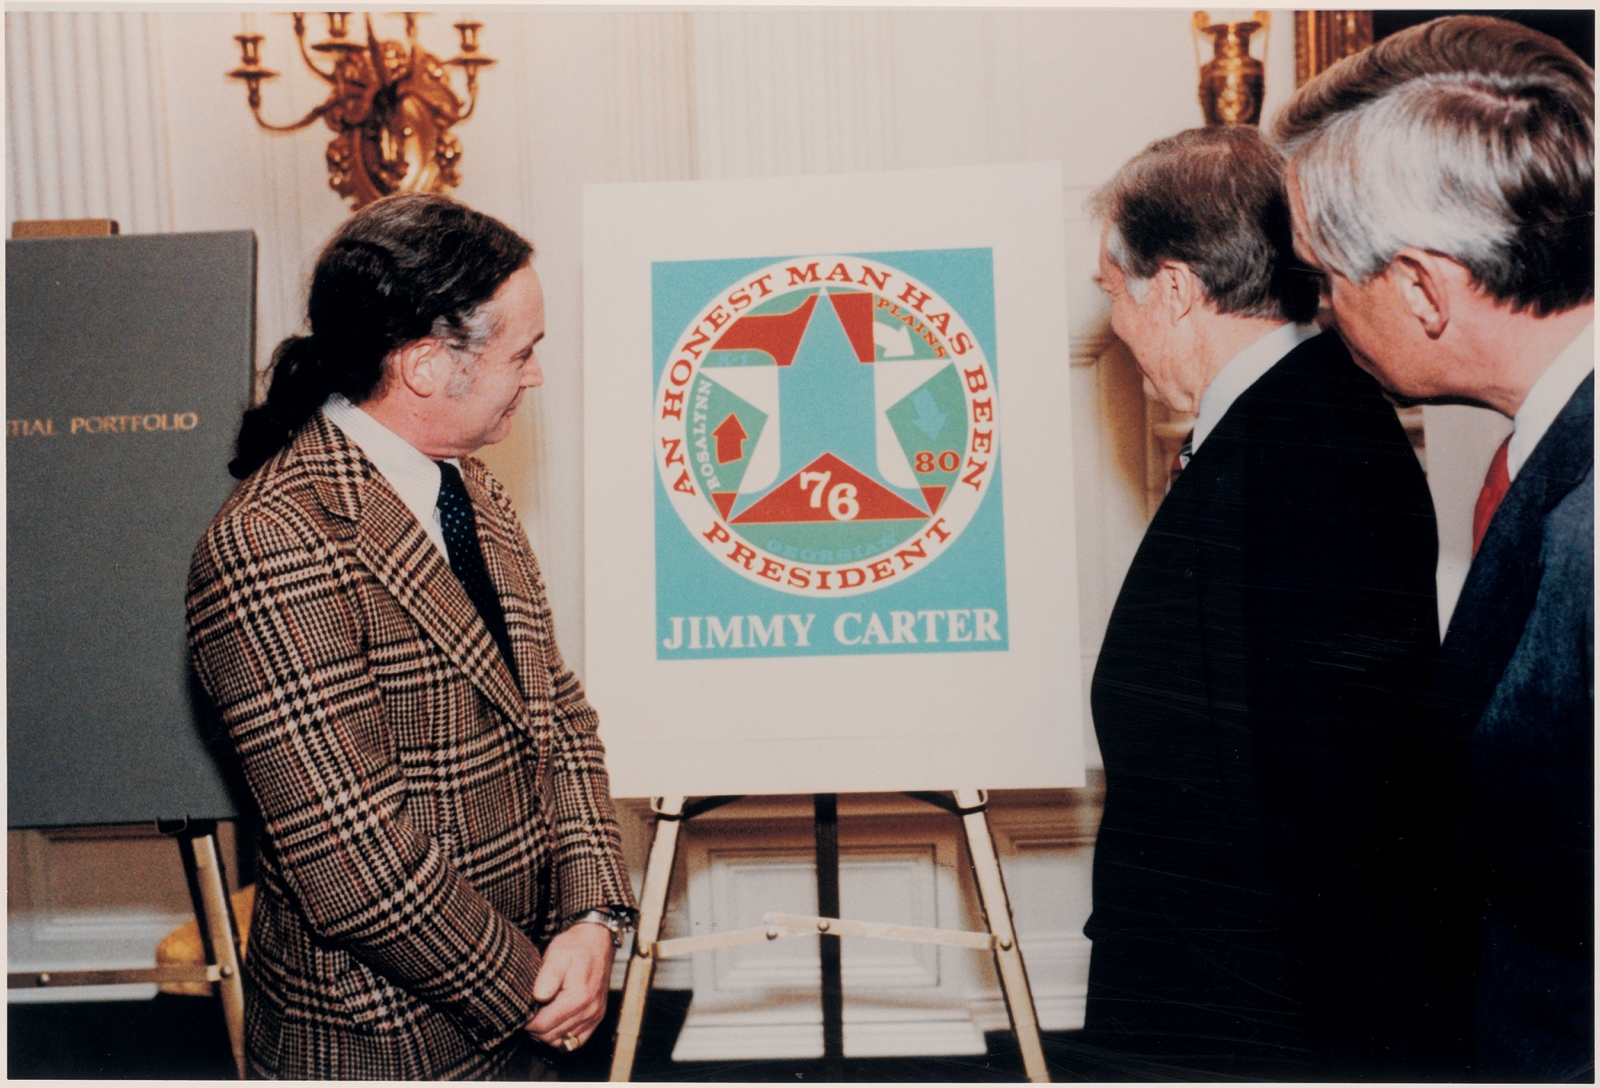 Indiana, left, presenting his serigraph&nbsp;An Honest Man Has Been President, to President Jimmy Carter and Vice President Walter Mondale, The White House, Washington, D.C., January 1981. Image courtesy of The Star of Hope, Vinalhaven, Maine